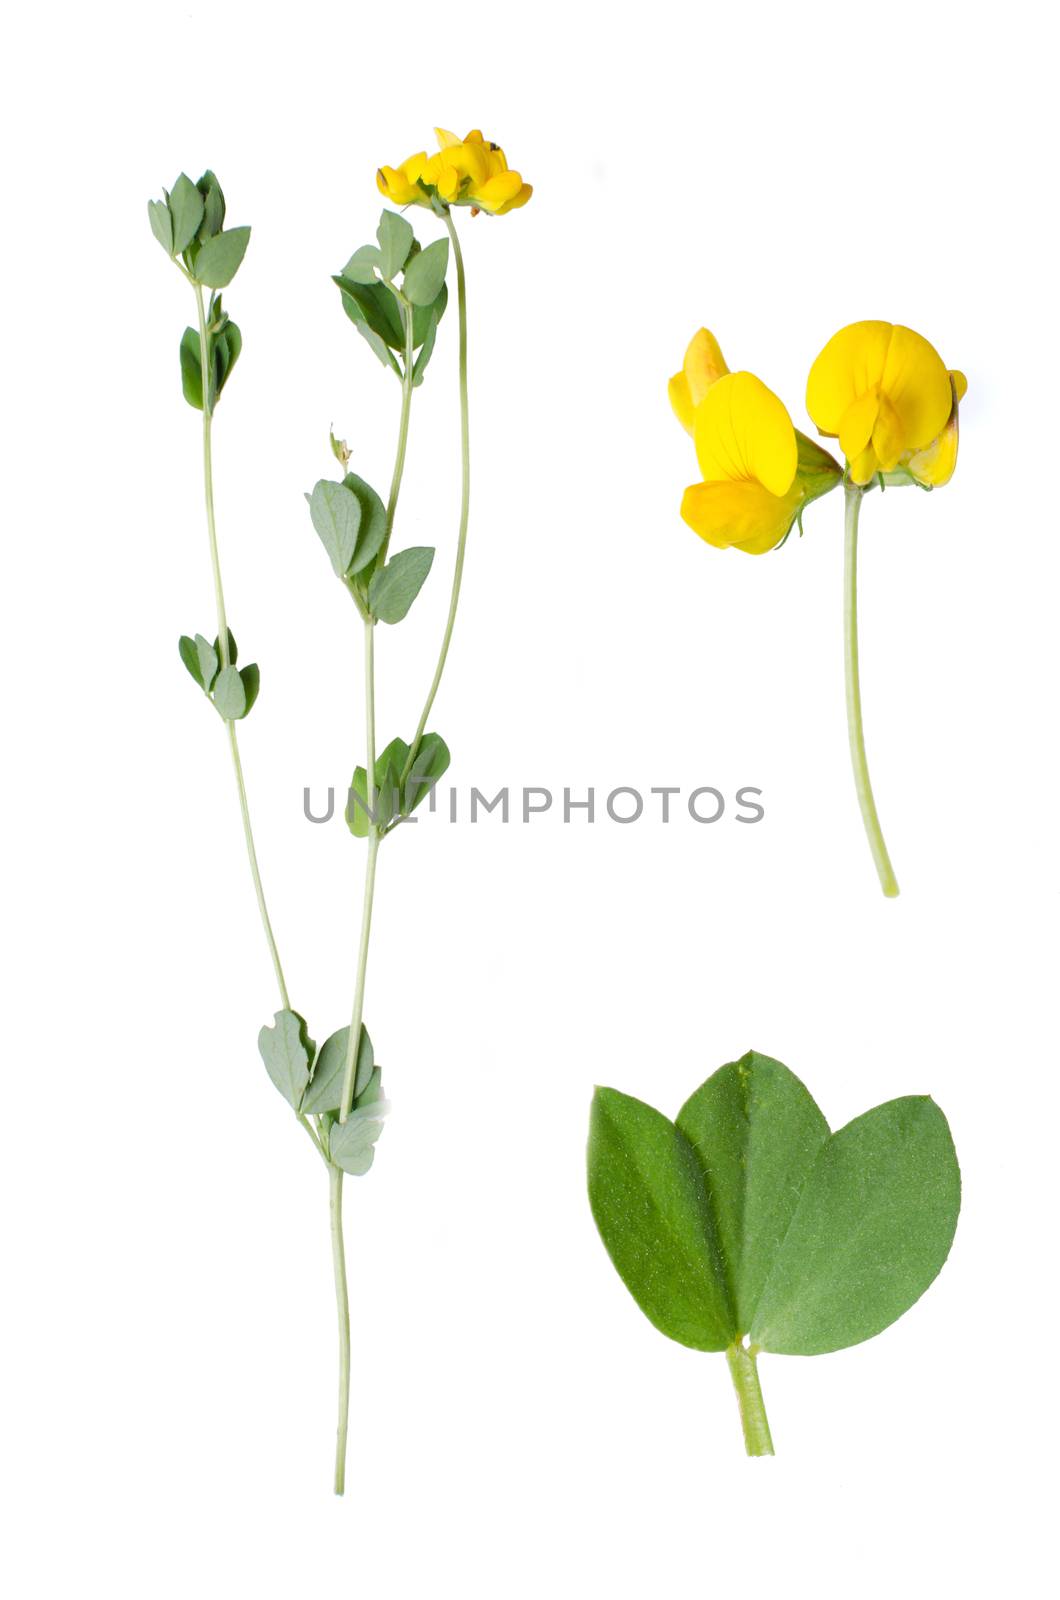 Lotus corniculatus with deatils of bloom and leaf beside isolated on white background.